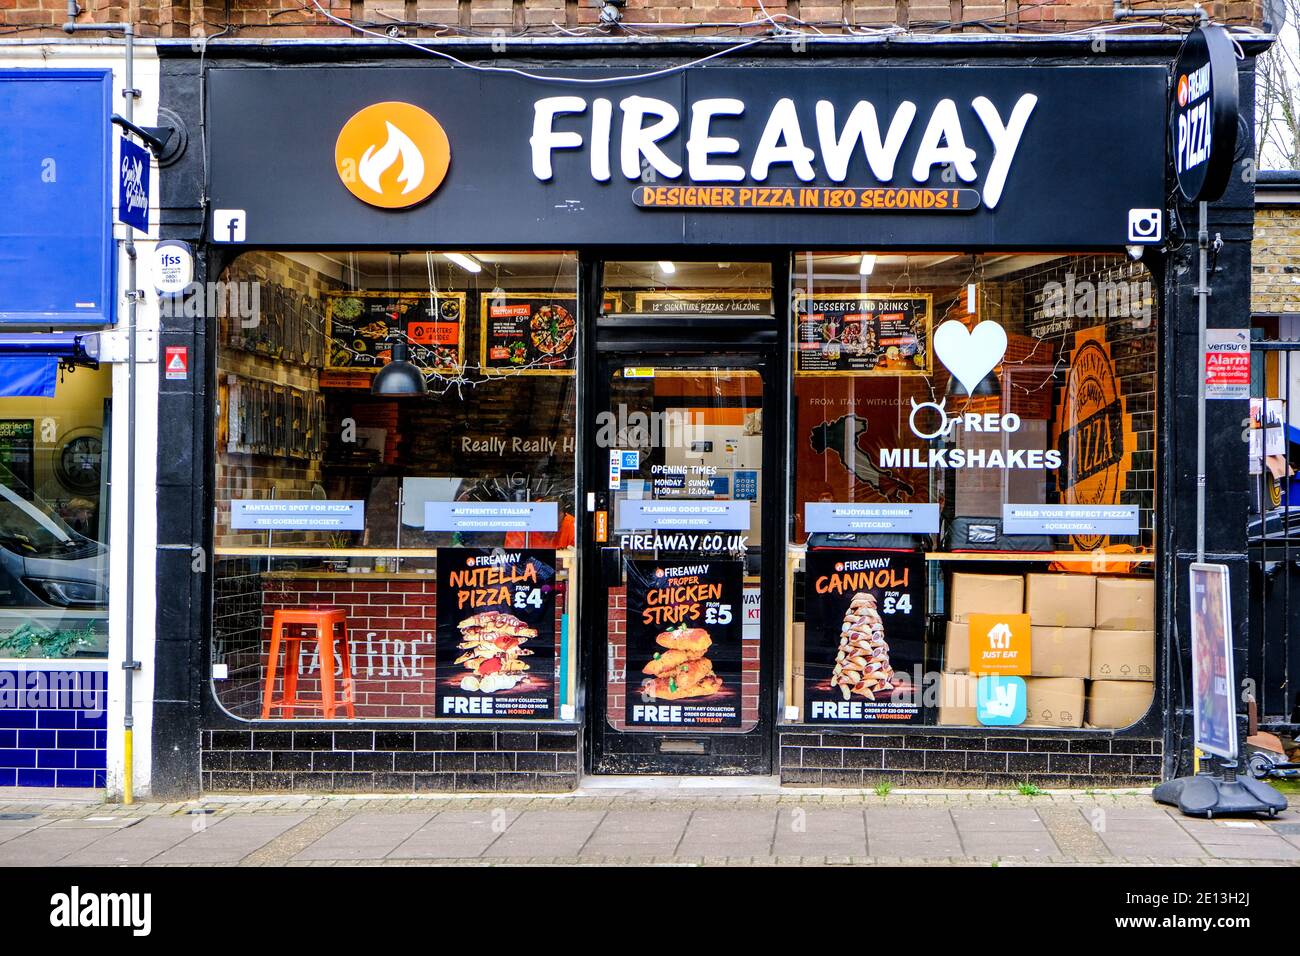 Epsom, London UK, January 03 2021, Independent Pizza Takeaway Shop Fireaway Open For Takaway Food During Covid-19 Tier 4 Lockdown Stock Photo